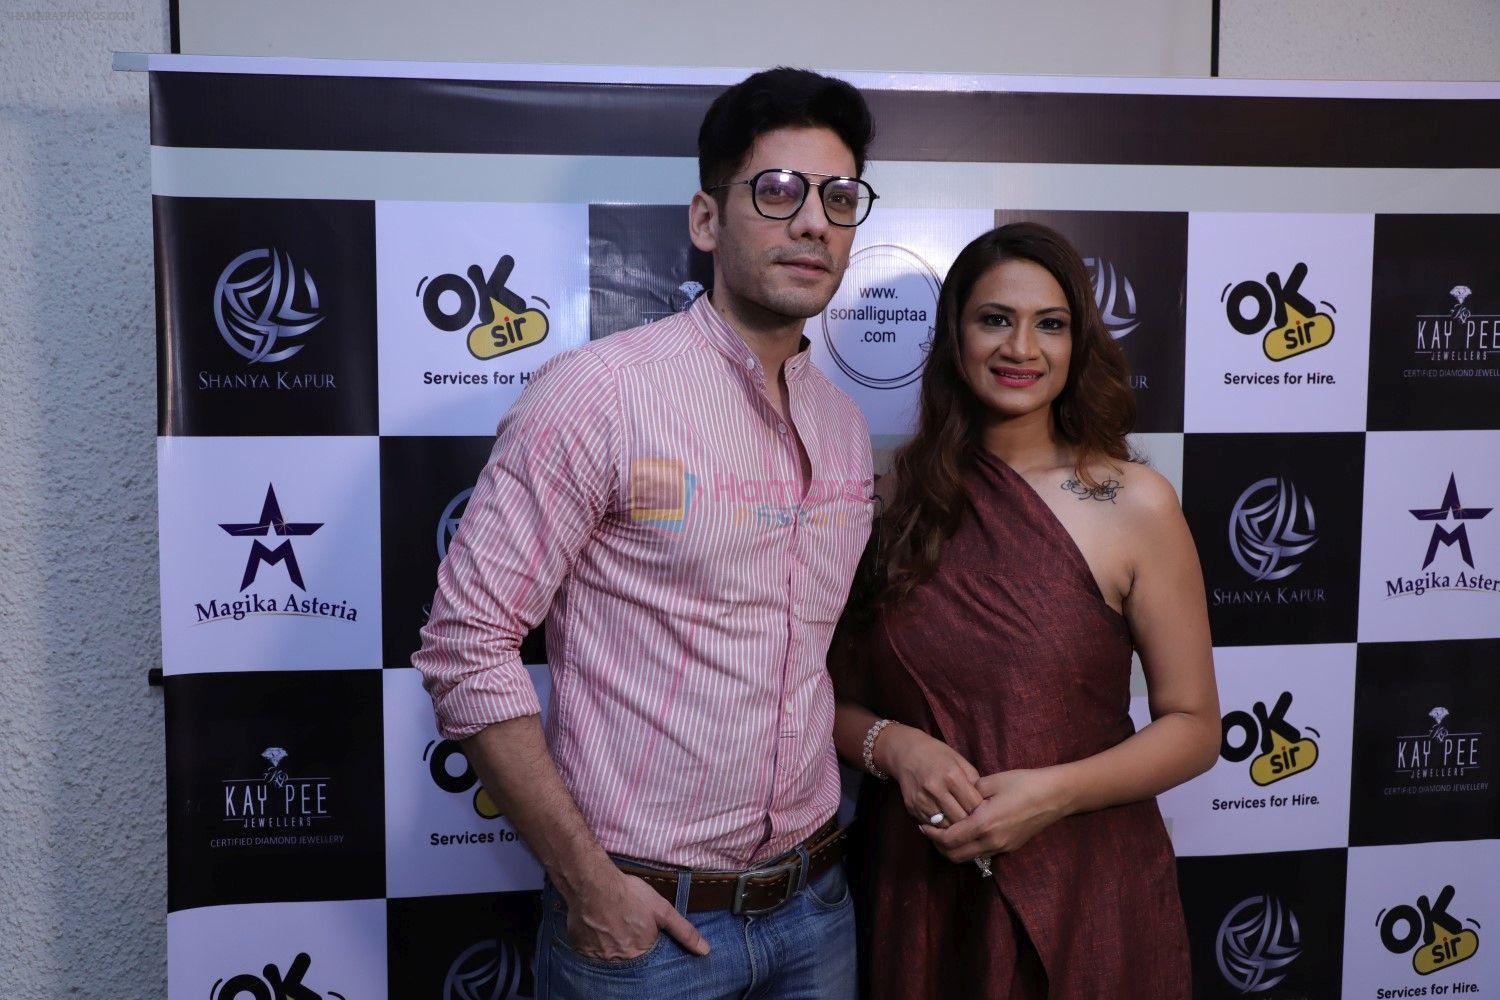 Vipul Gupta and Sonalli Guptaa at her Book Launch in Association with ShanyaKapur�s Collection by Kay Pee Jewellers